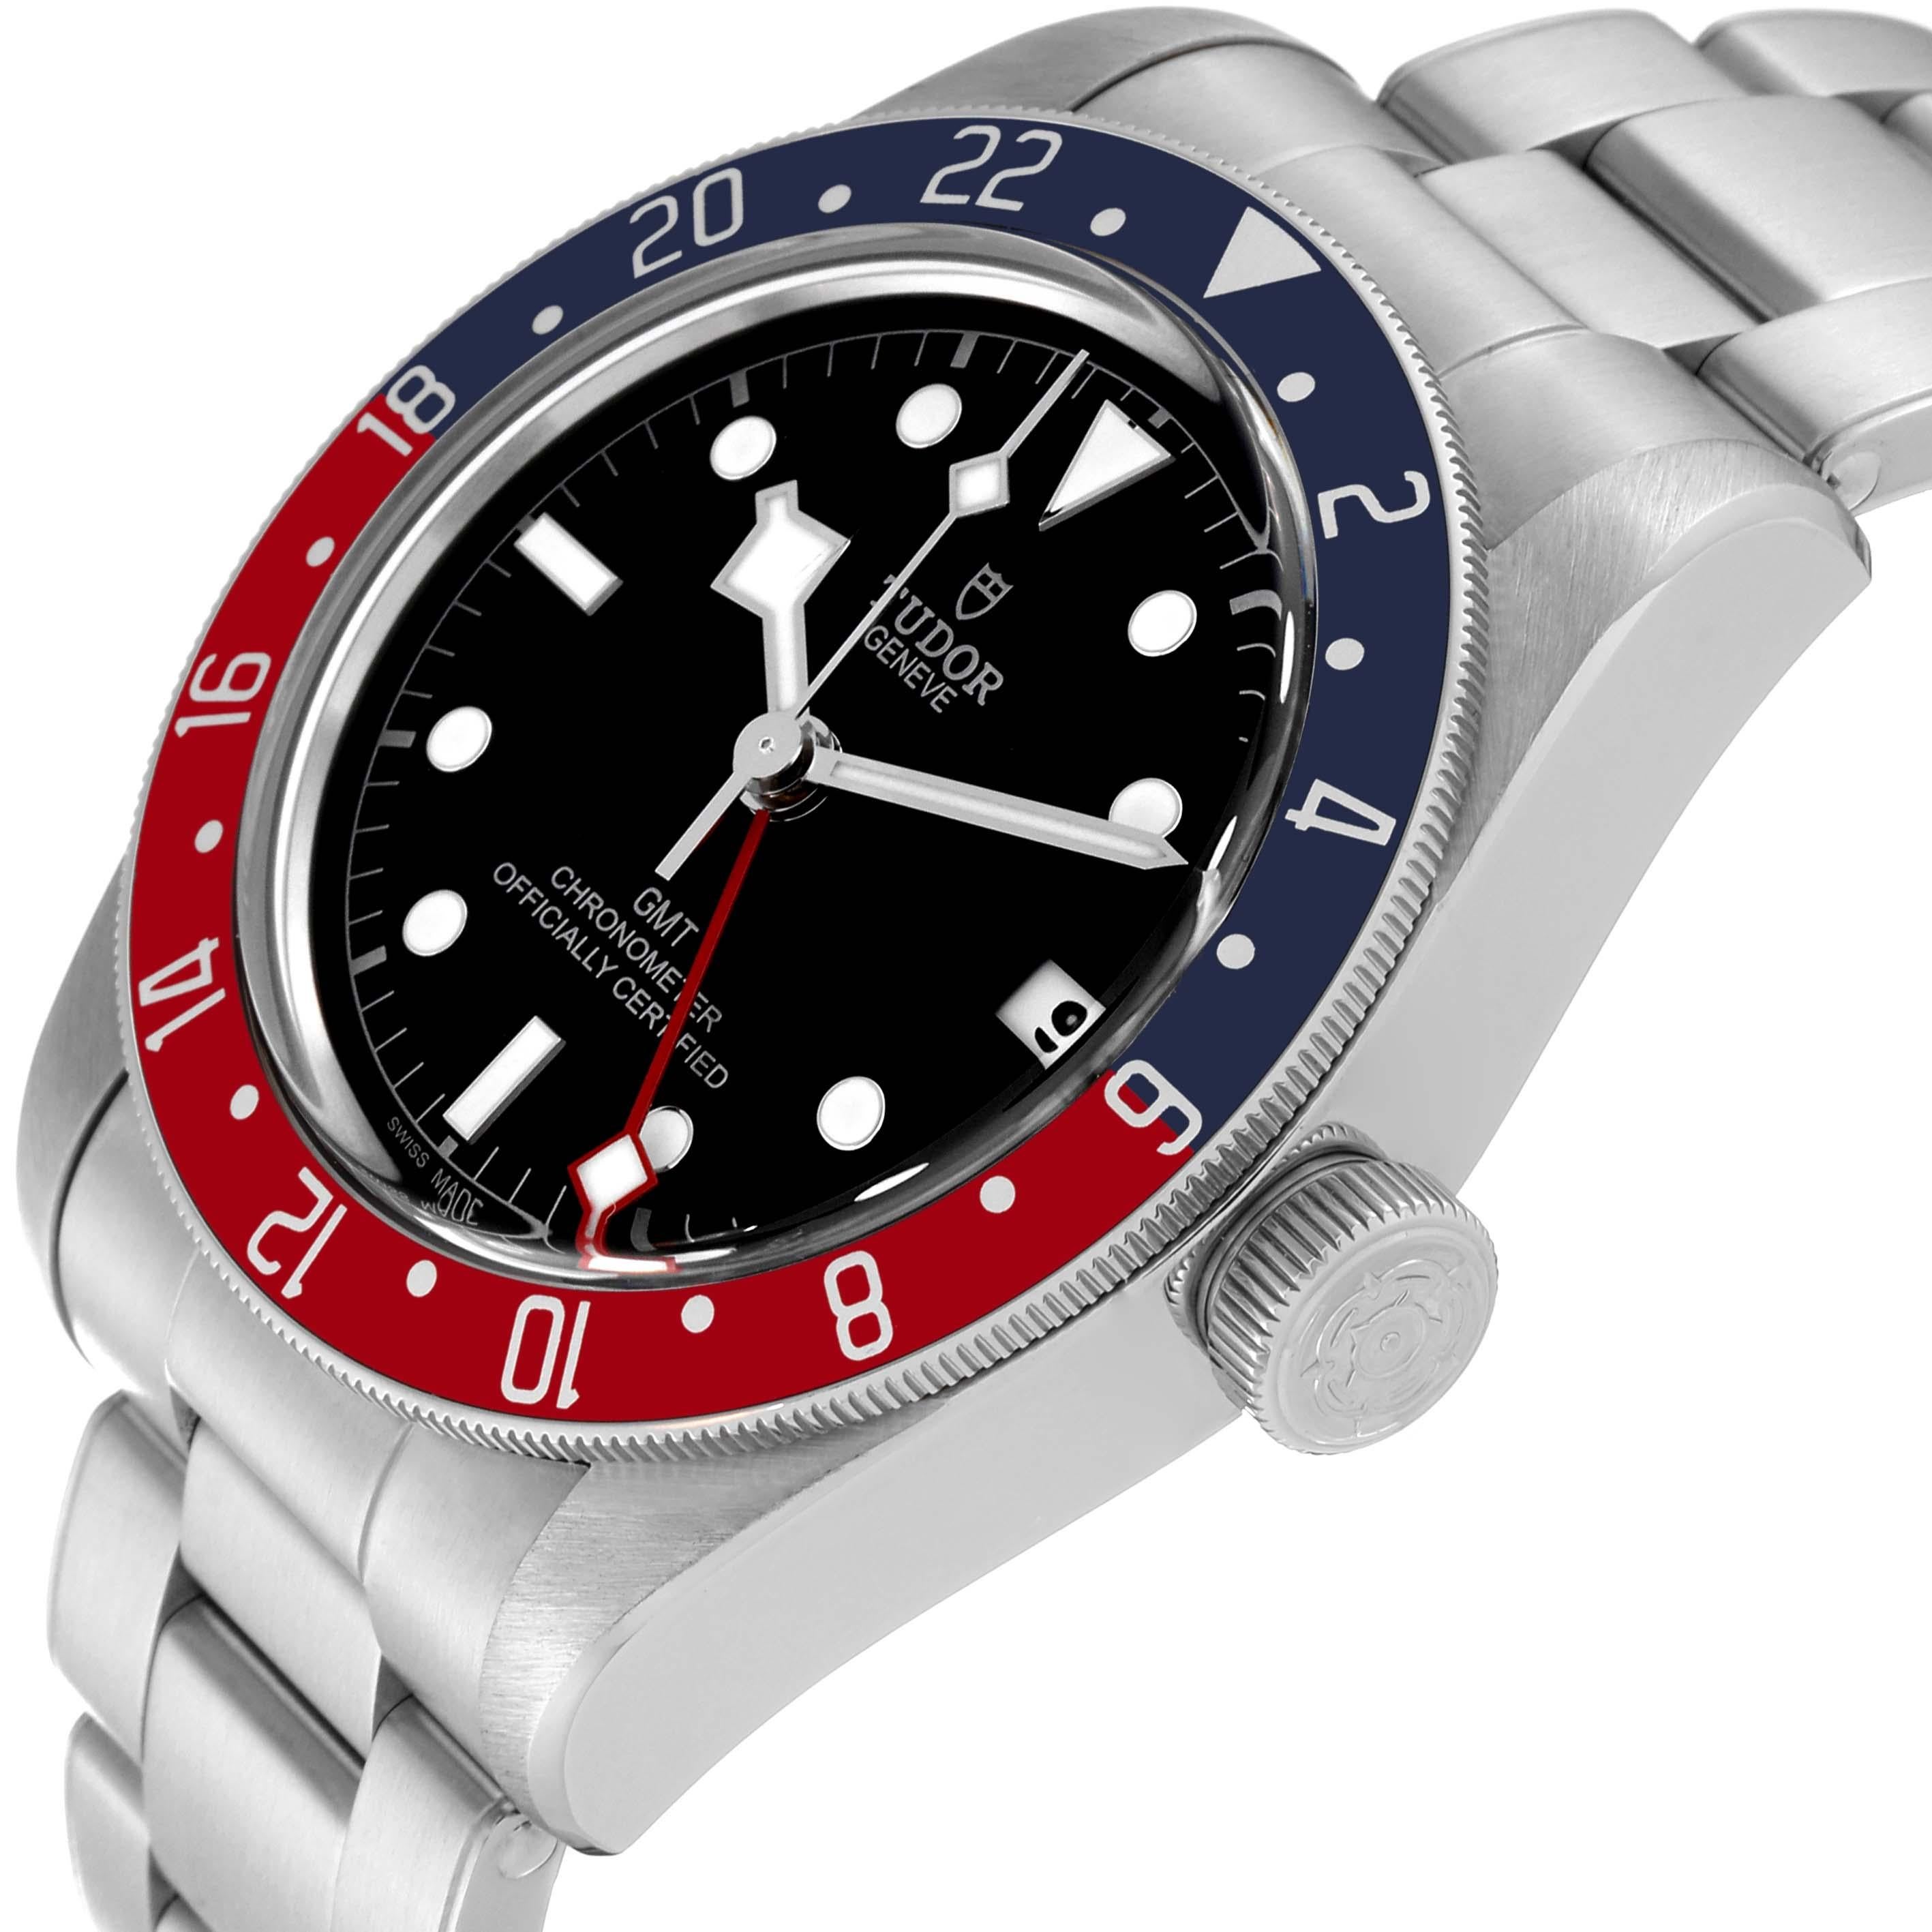 Tudor Heritage Black Bay GMT Pepsi Bezel Steel Mens Watch 79830RB. Automatic self-winding movement. Stainless steel oyster case 41.0 mm in diameter. Tudor logo on crown. Bidirectional rotating red and blue (Pepsi) bezel. Scratch resistant sapphire